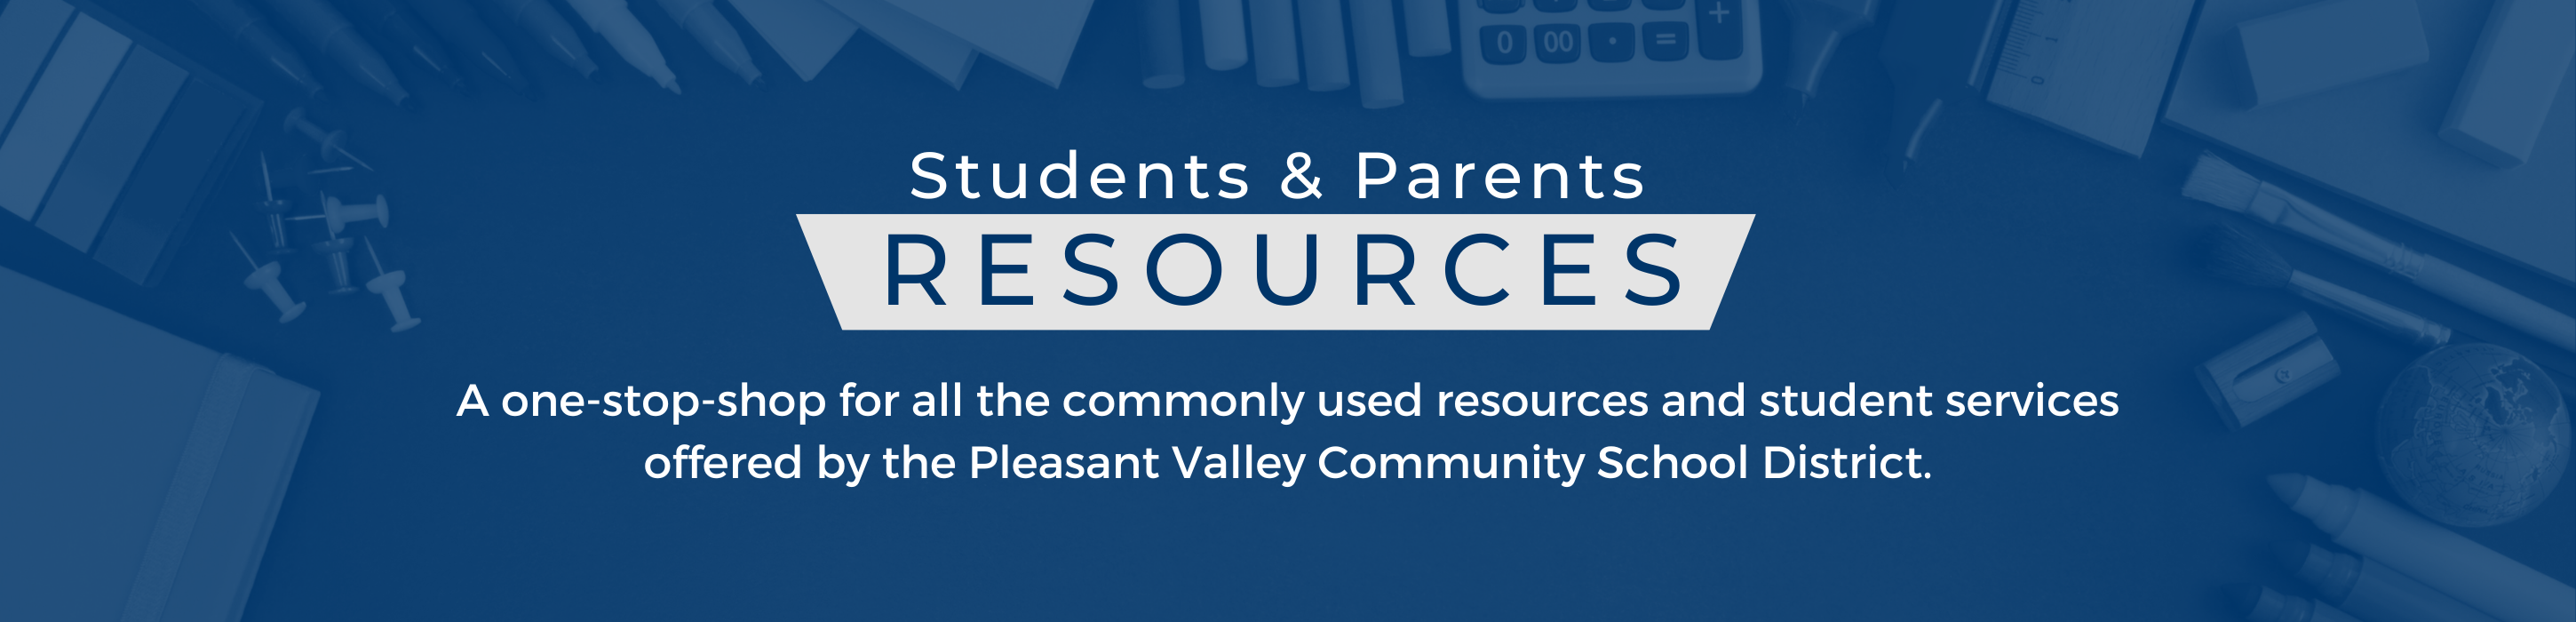 Students and Parents Resources